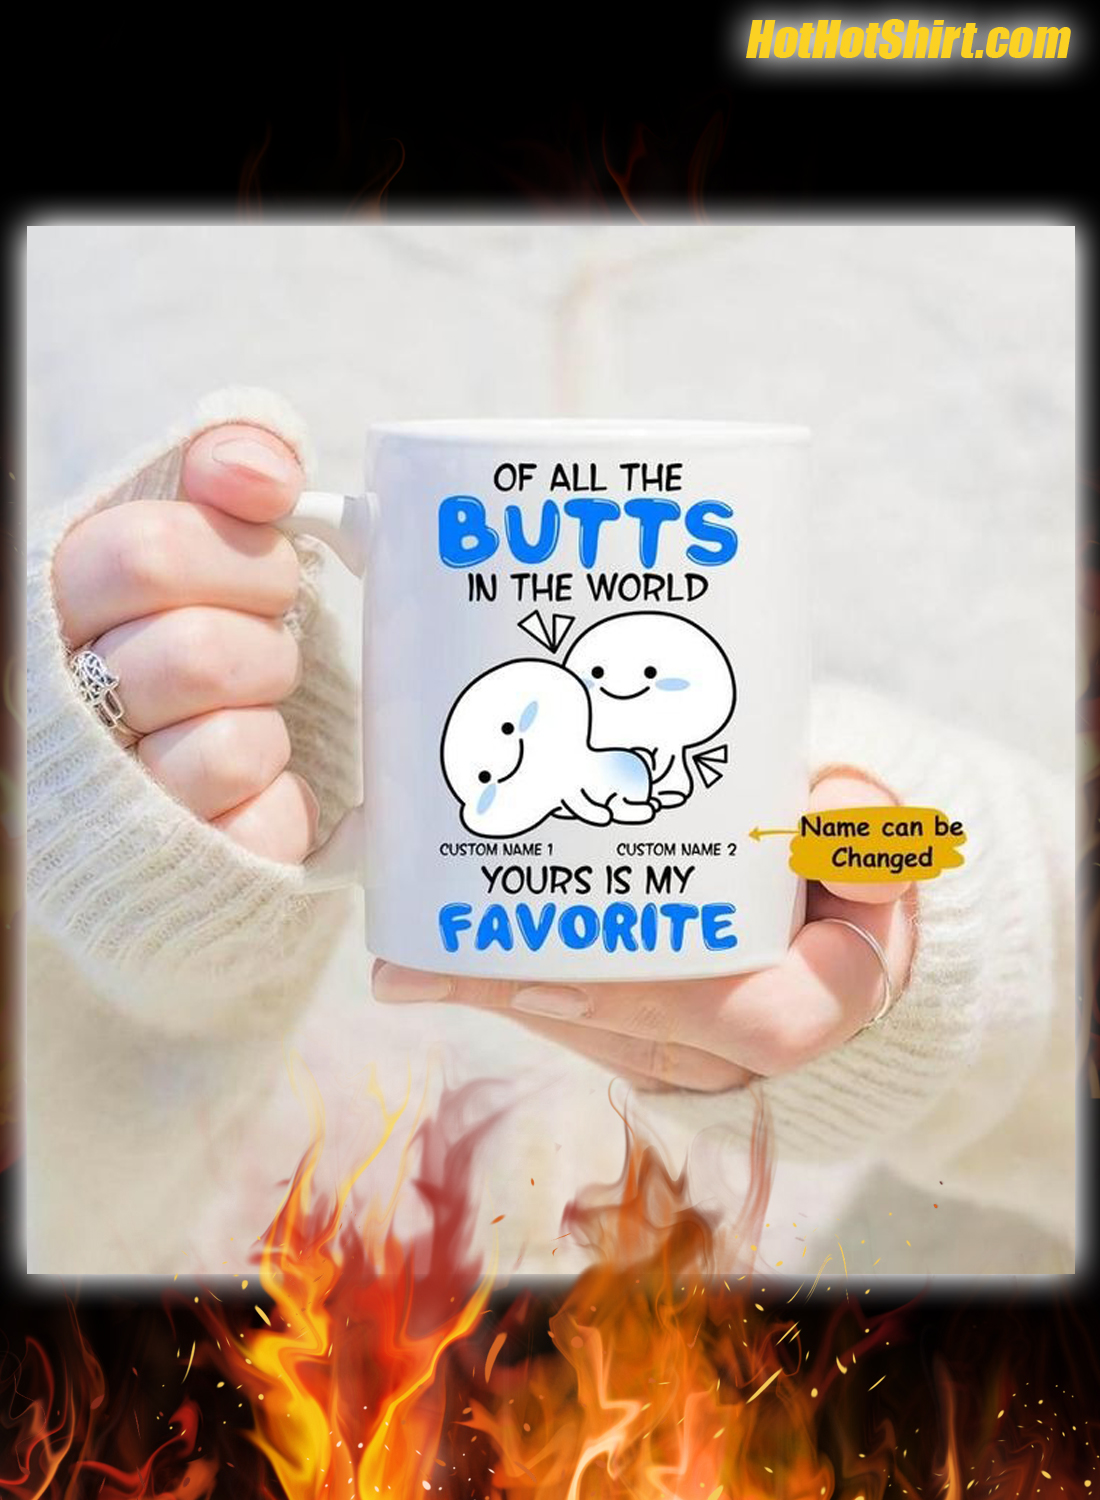 Personalized customize of all the butts in the world yours is my favorite mug